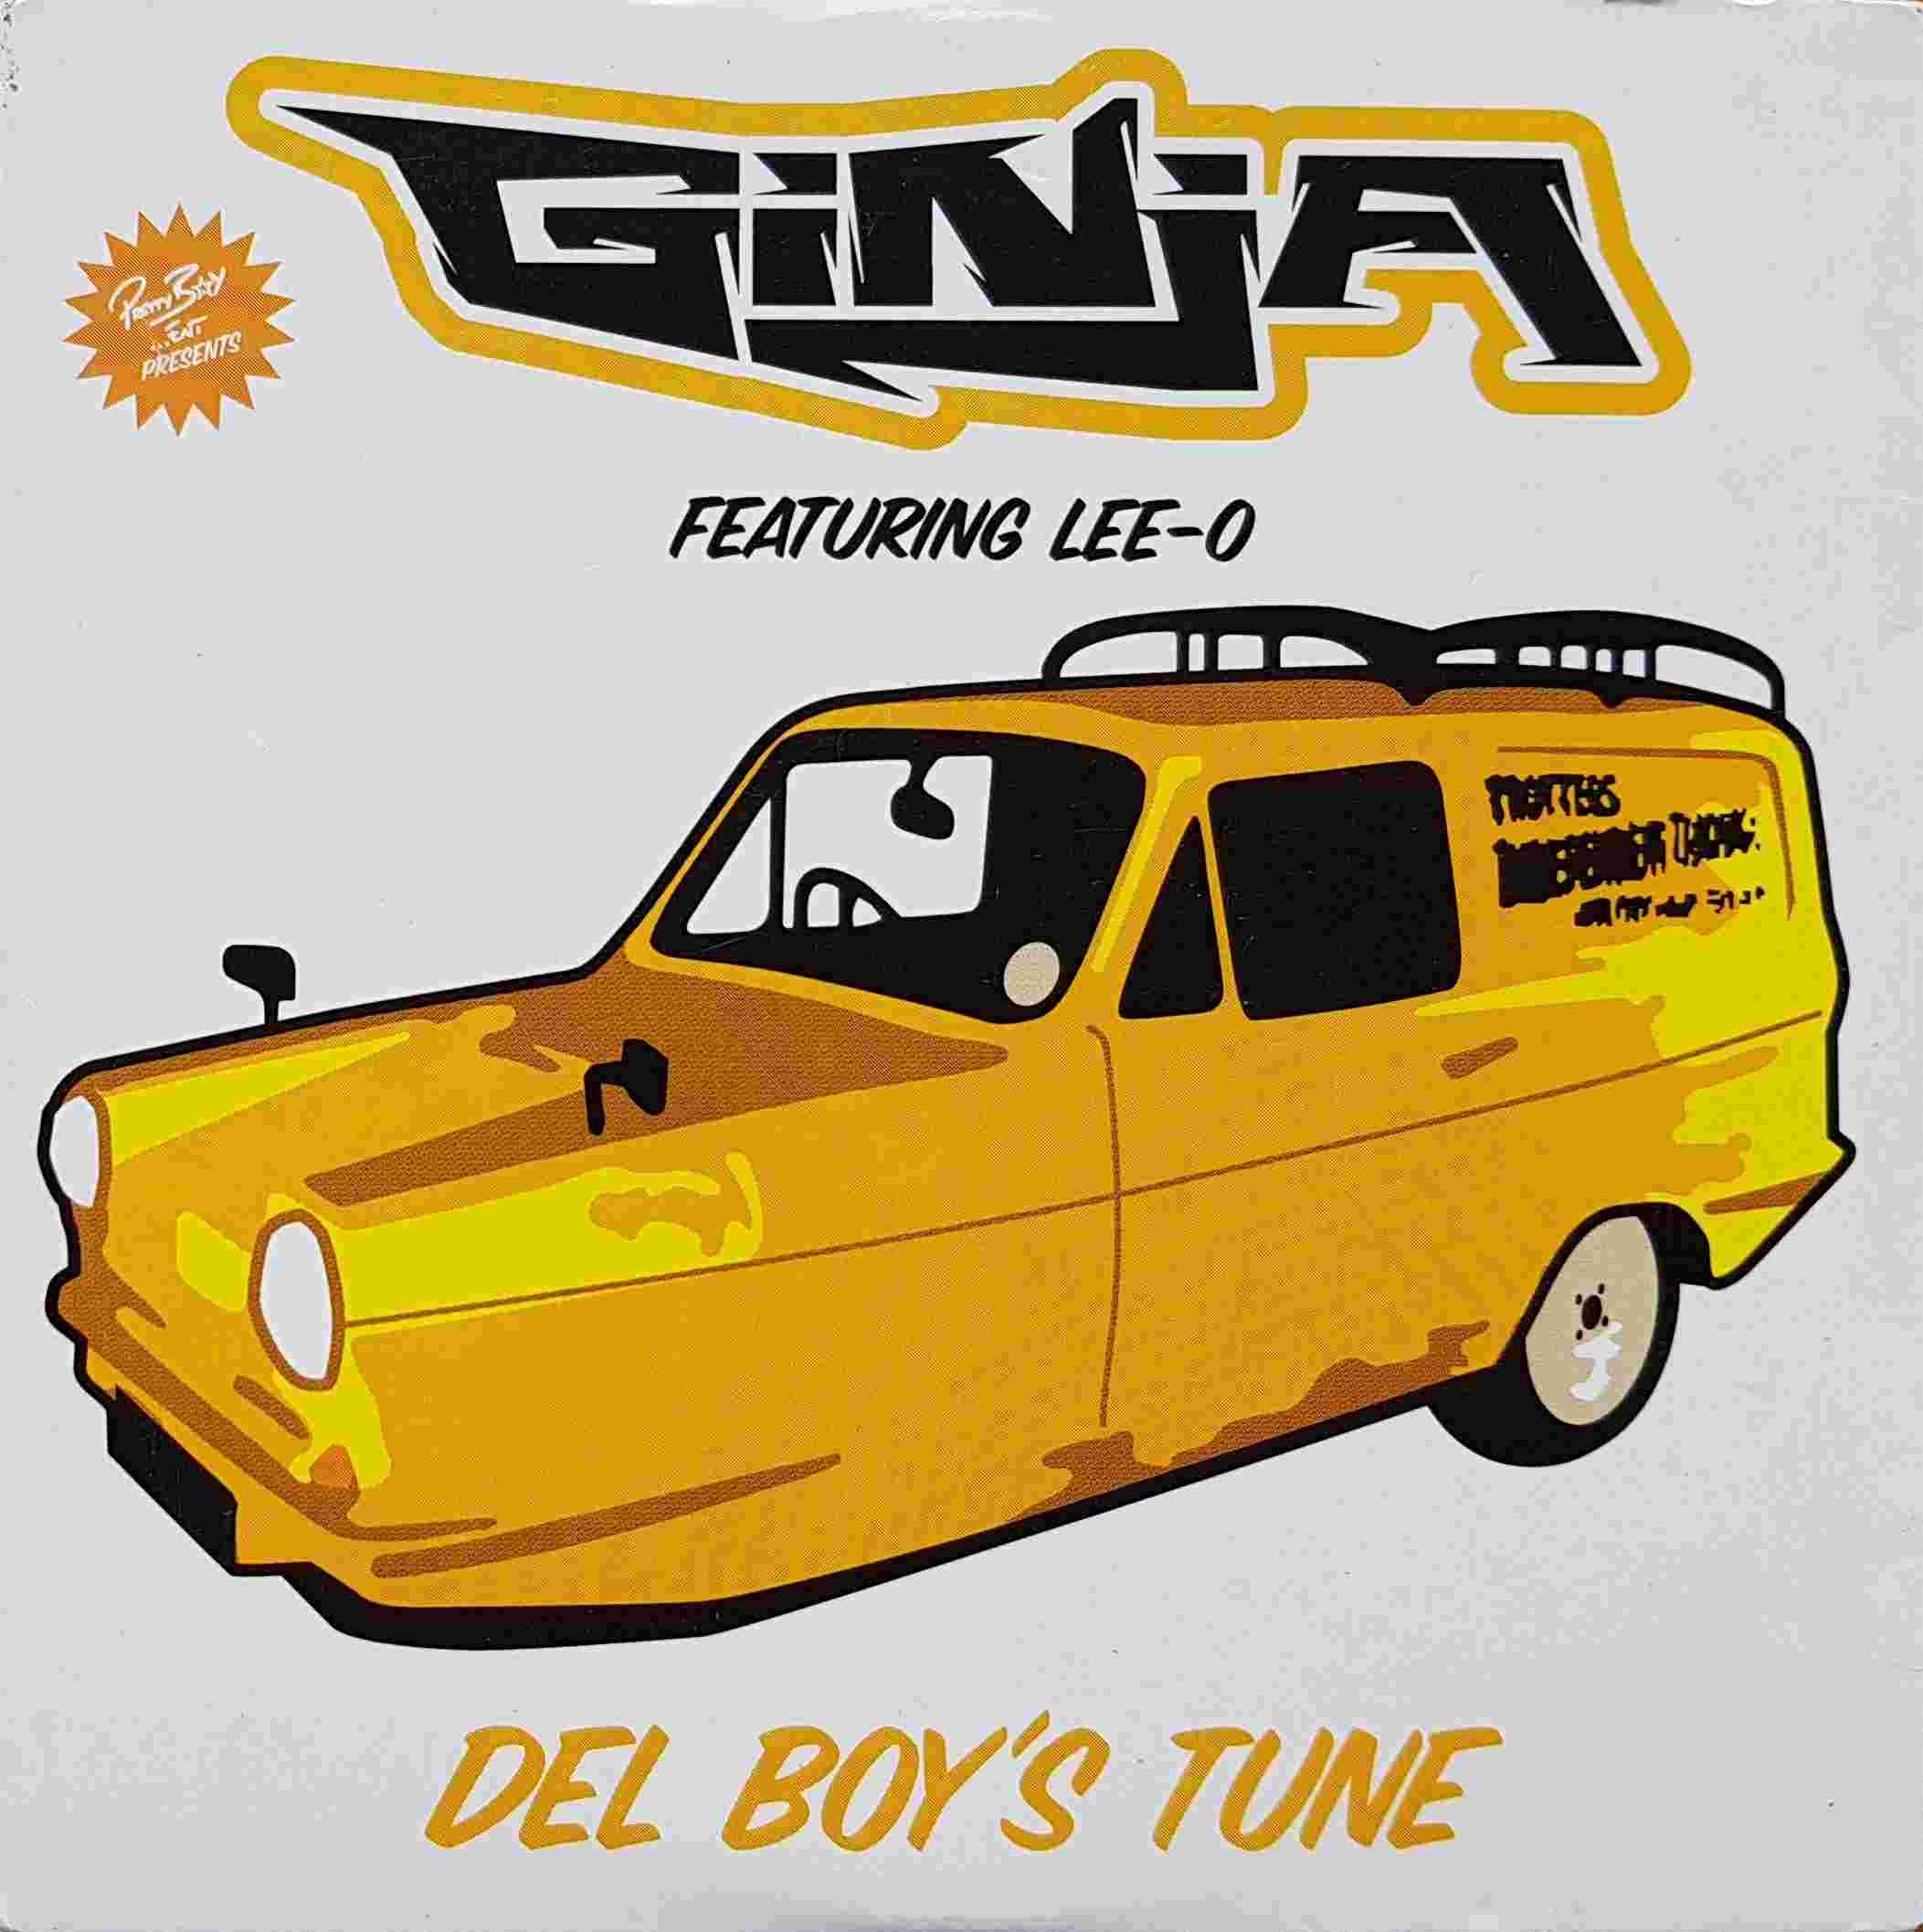 Picture of GinjaPromo01 Del Boy's tune by artist Ginja featuring Lee-O from the BBC cdsingles - Records and Tapes library